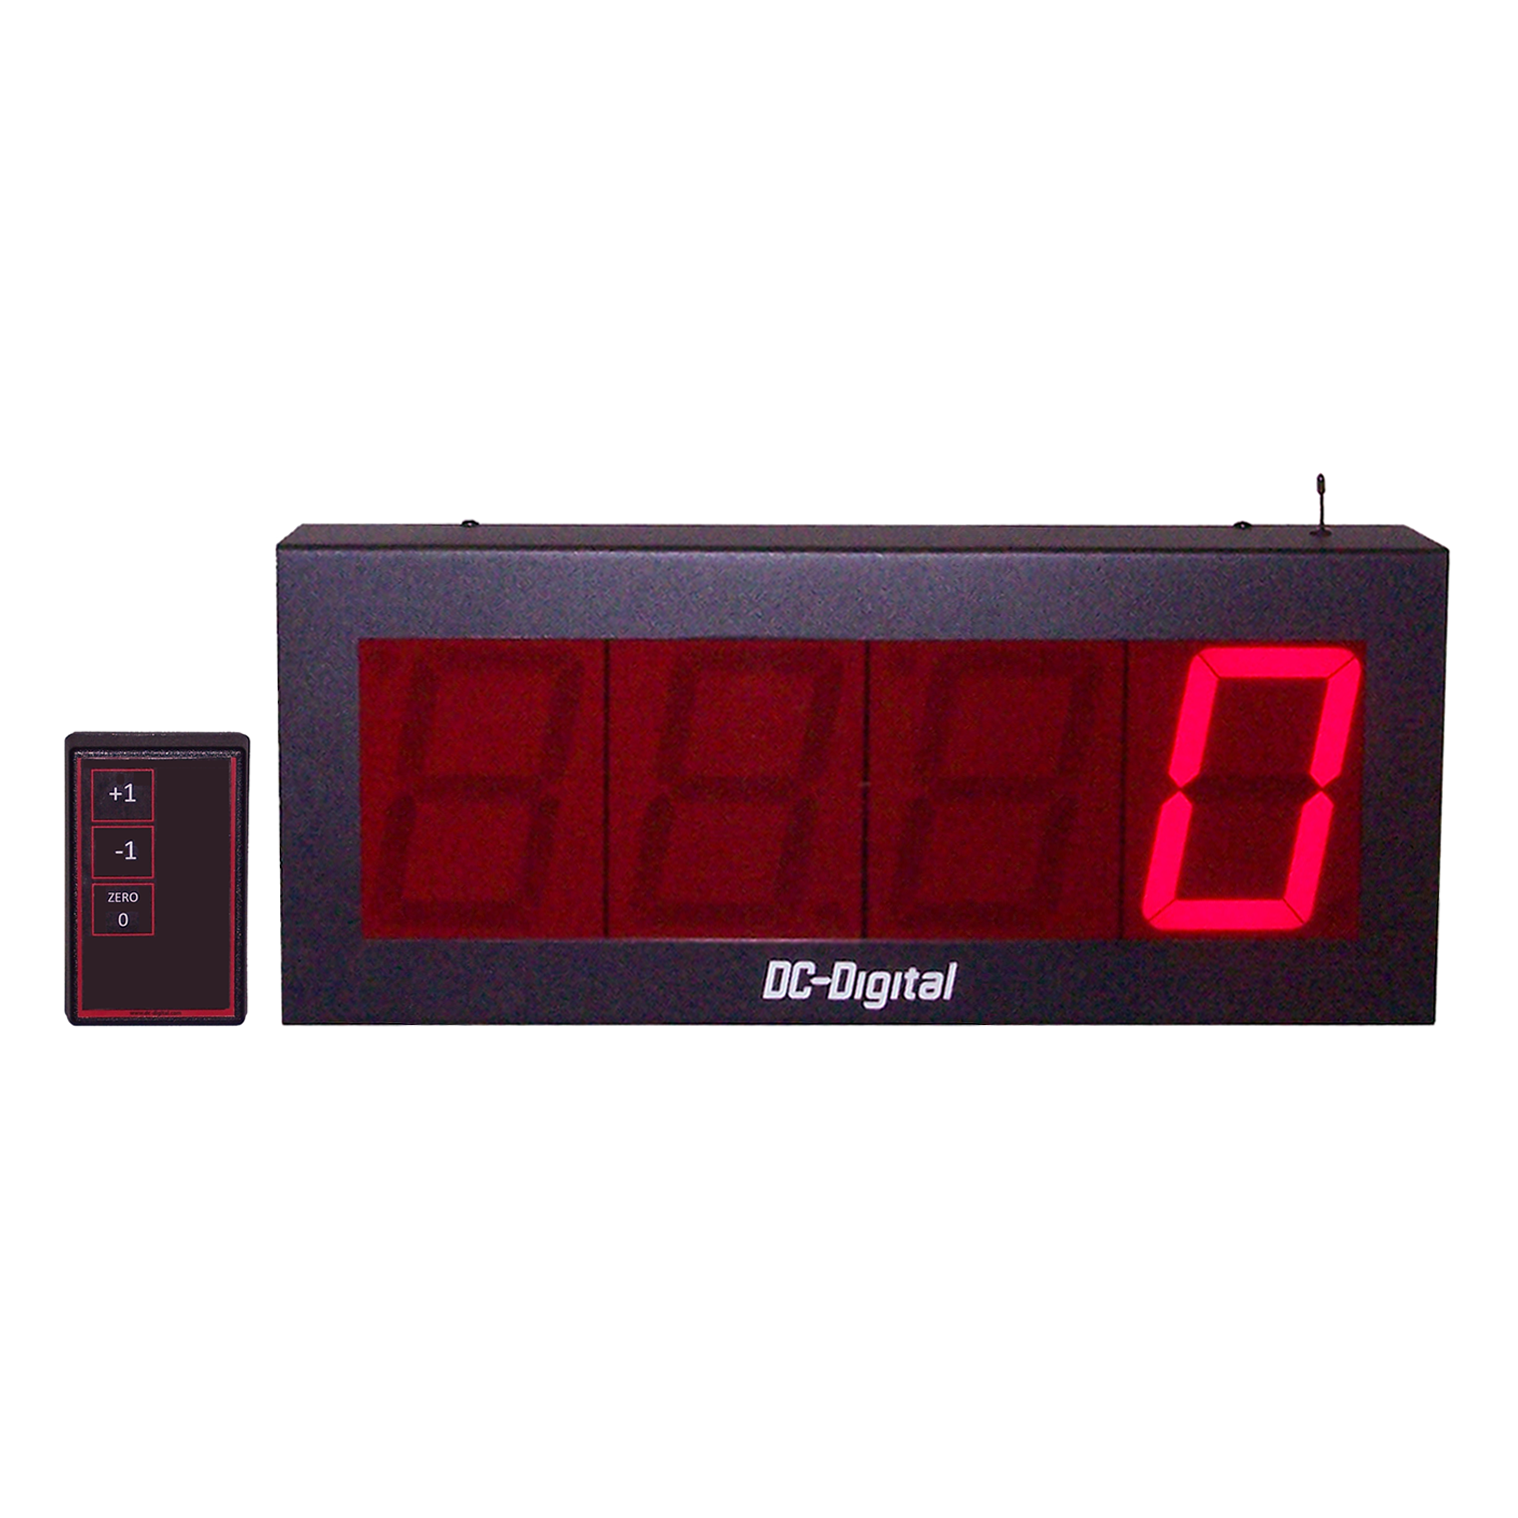 (DC-40T-UP-DAYS-W) 4.0 Inch LED Digit, RF-Wireless Remote Handheld Controlled, Count Up by Days Timer